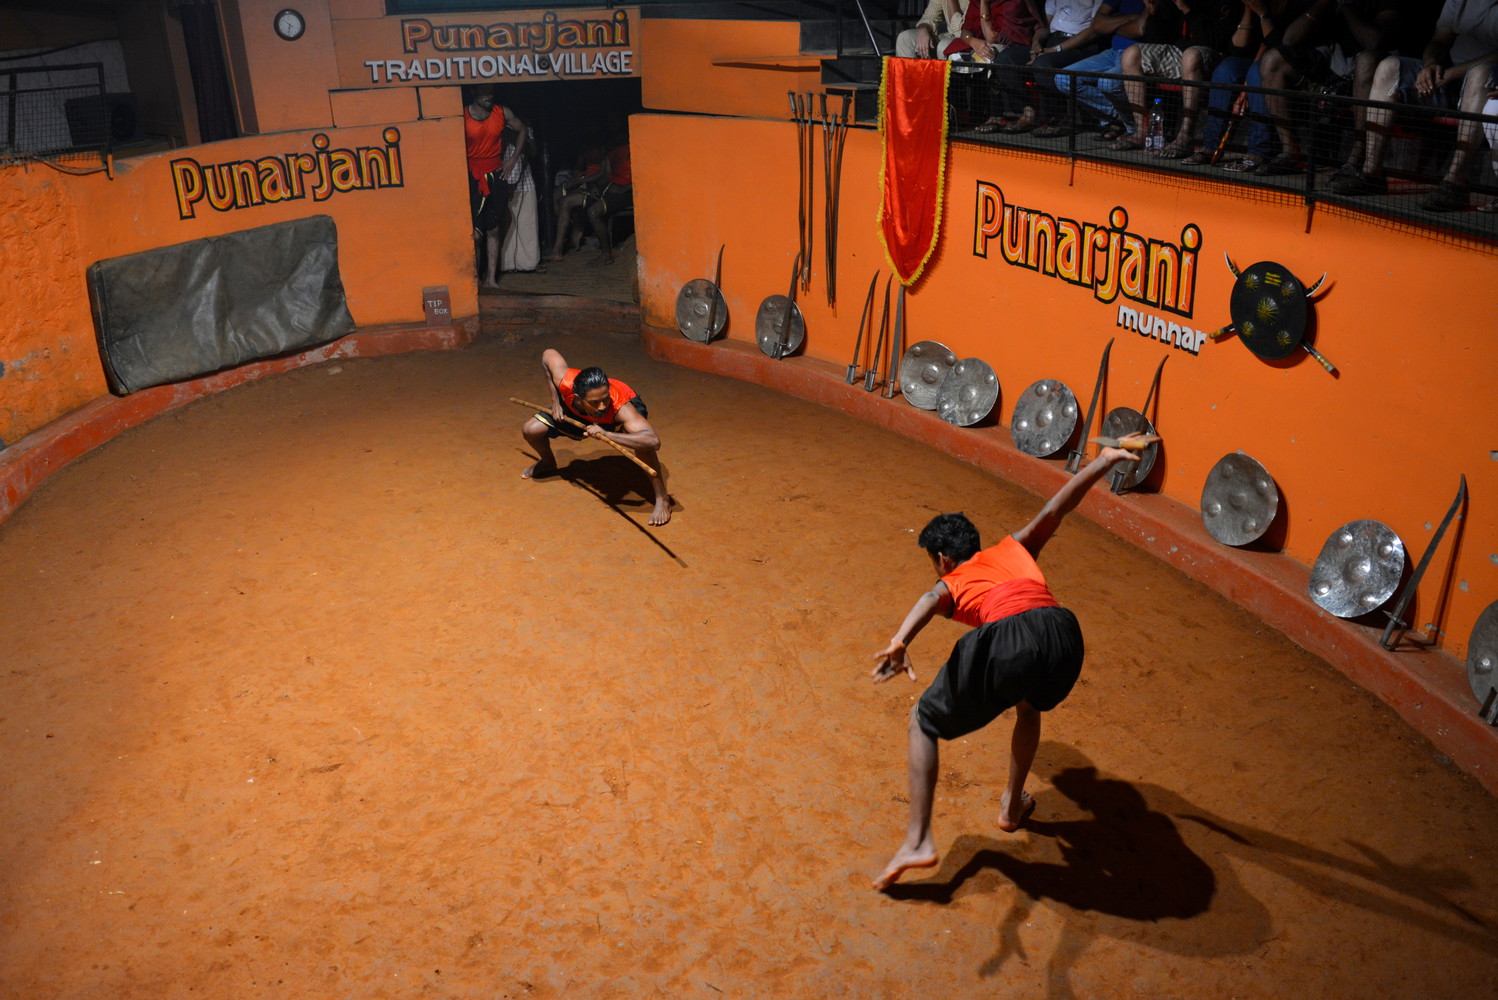 Two martial artists performing in an arena: One artist on the right side is crouching with a stick held in his both hands ready to attack the other artist on the left side while the other artist is looking at him with his hands extended outwards anticipating the move of the first artist